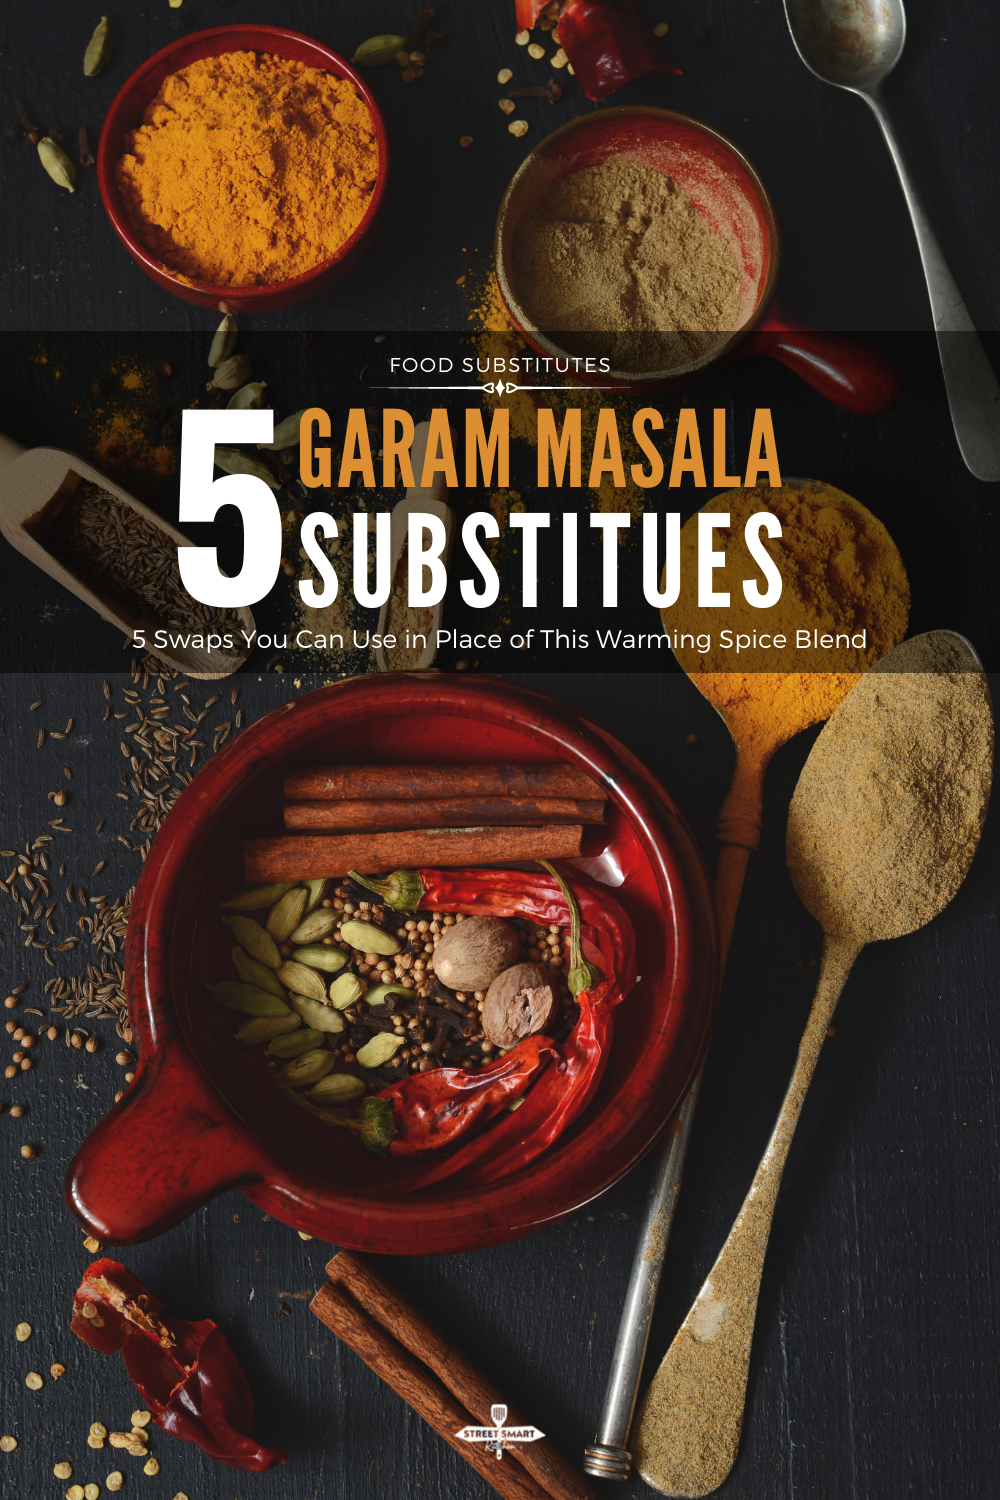 Find out what you can use as a garam masala substitute if you are out of this blend of warming spices to make an Indian dish taste authentic.